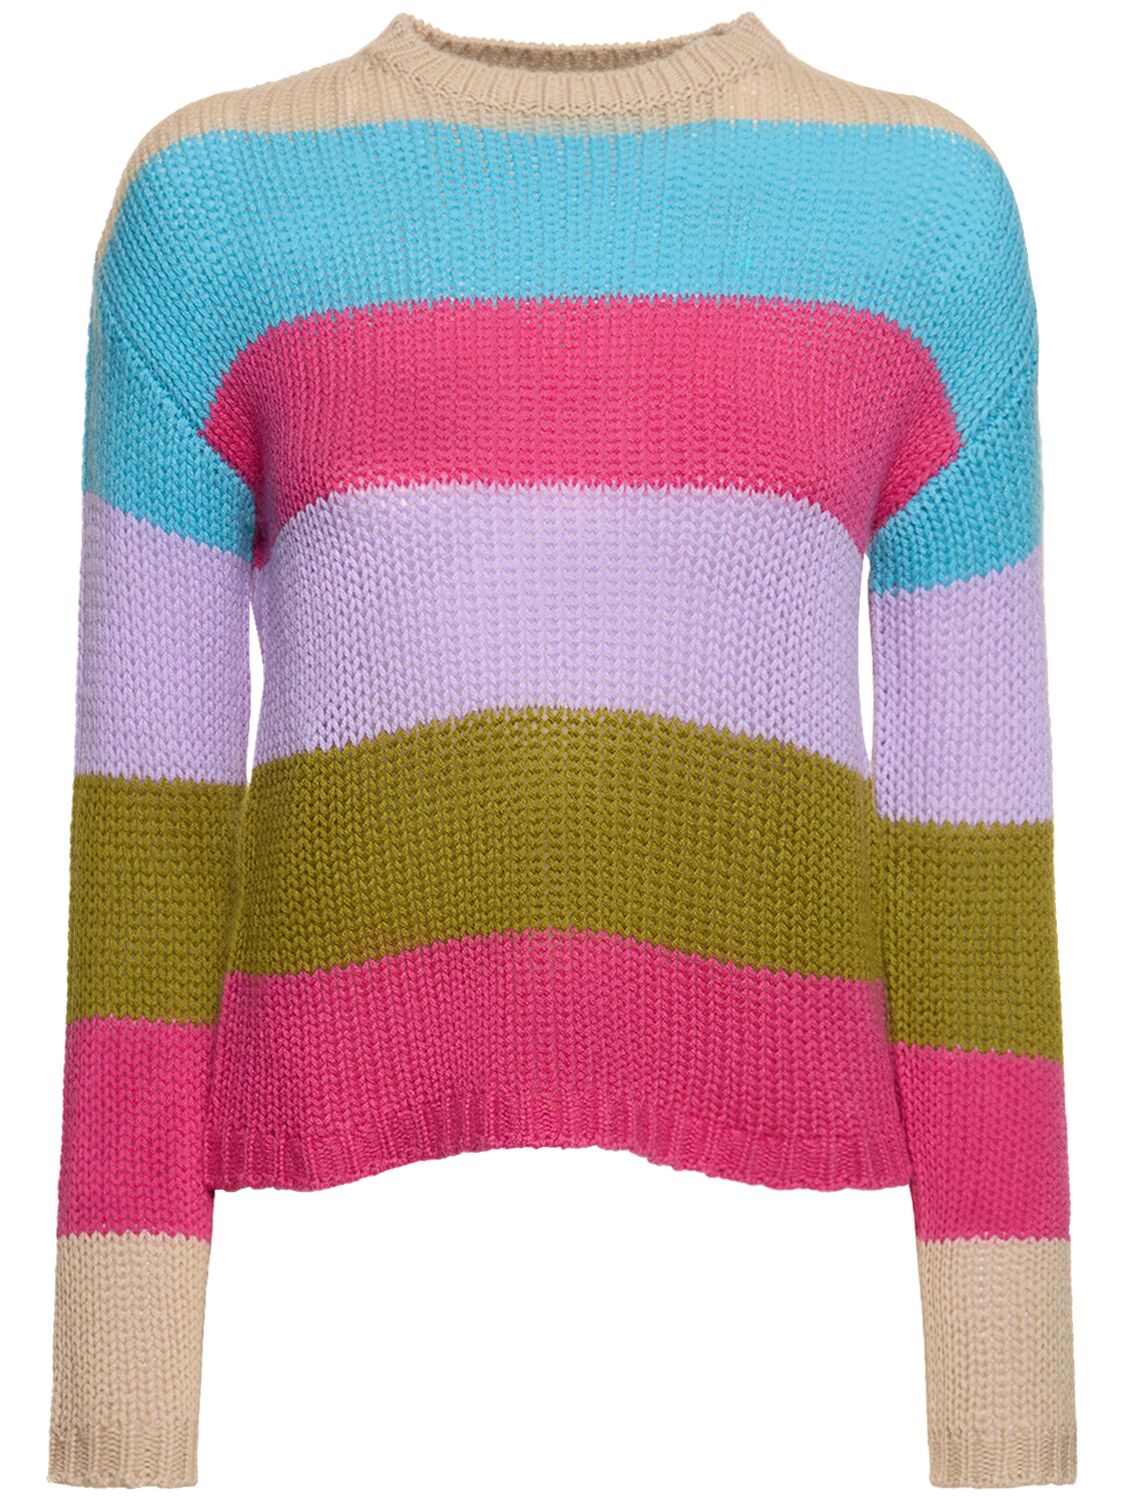 Image of Palco Striped Cashmere Knit Sweater